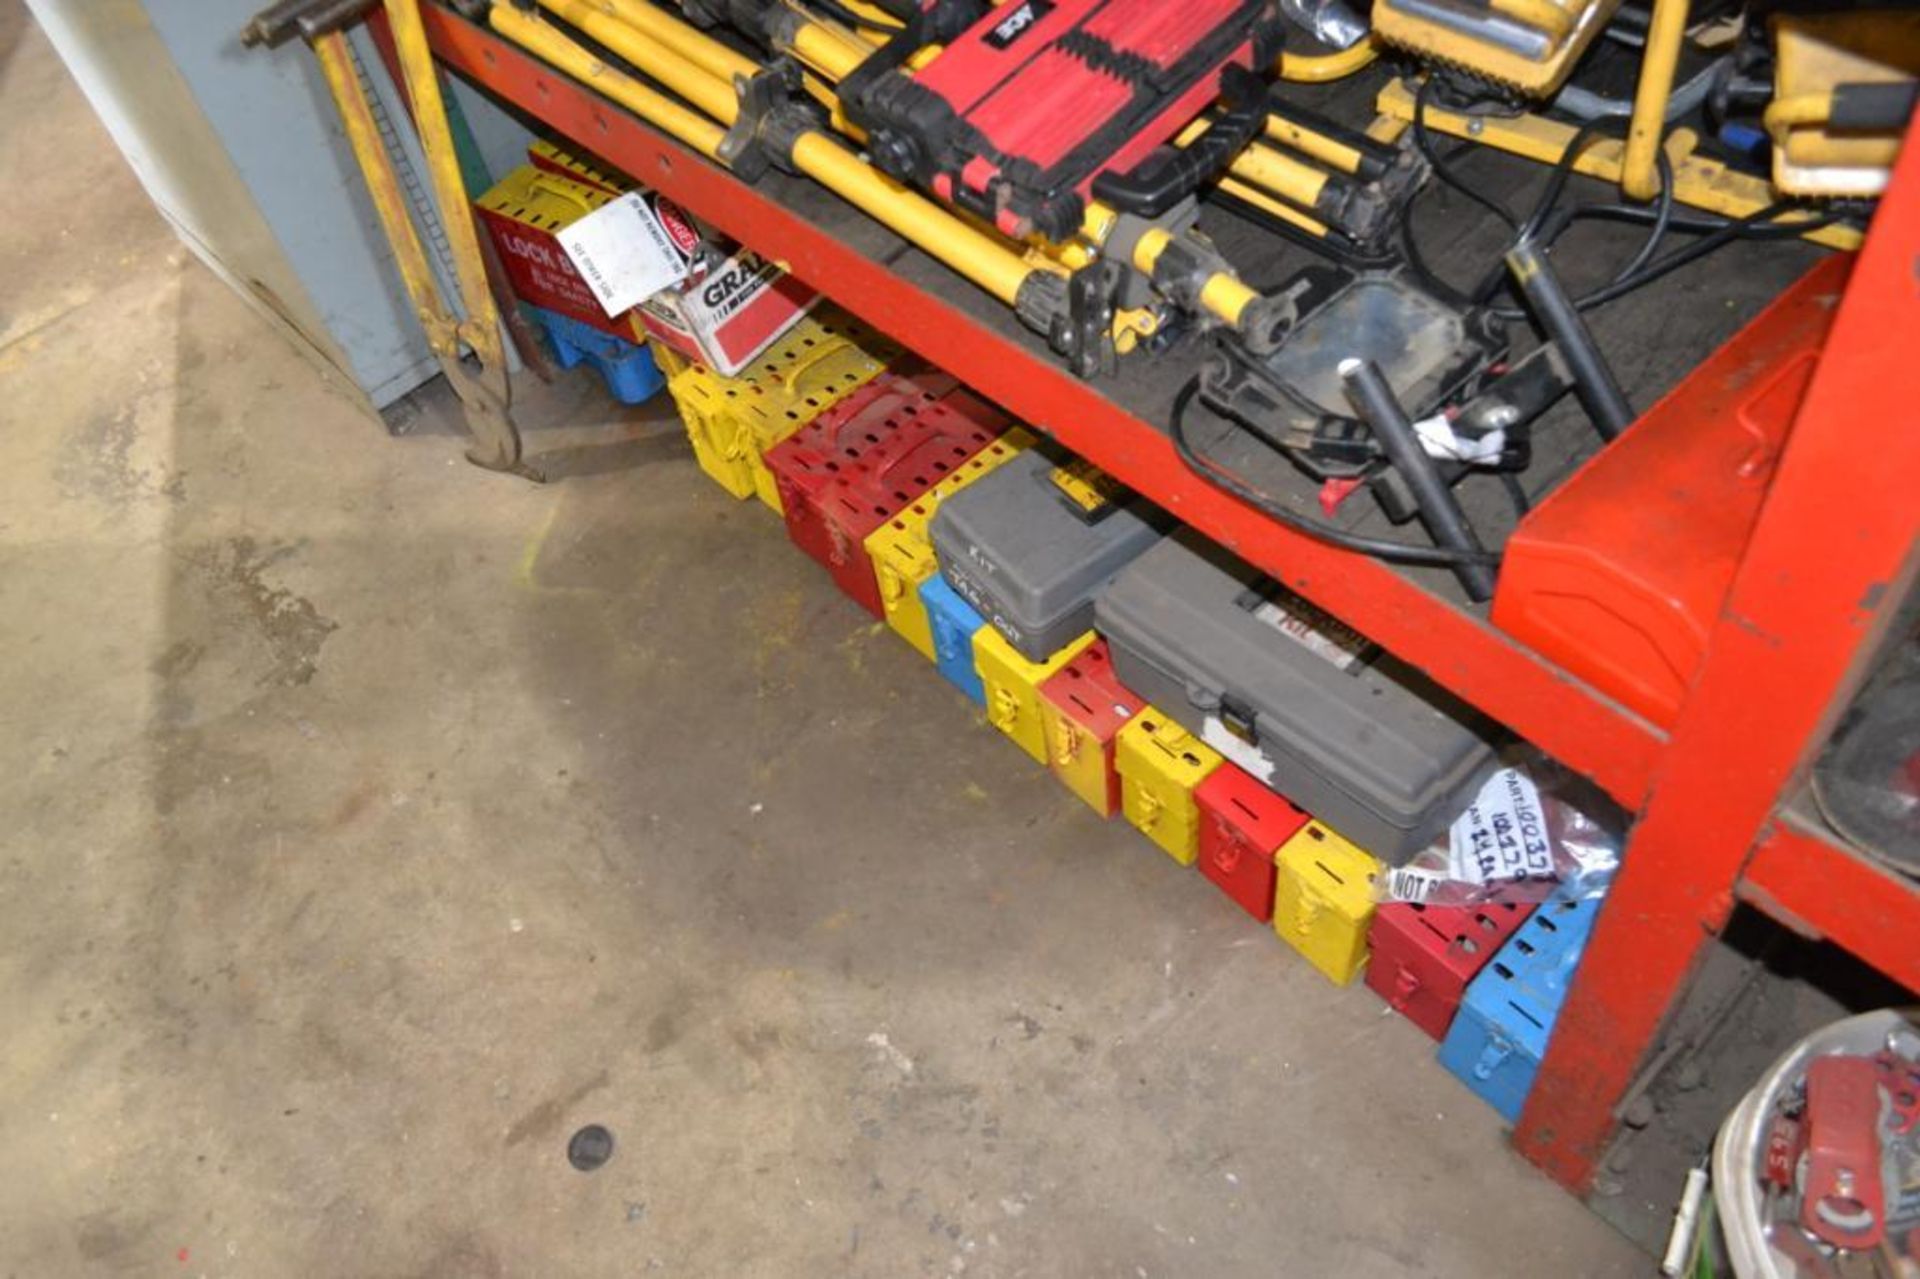 LOT: STEEL SHELVING UNIT WITH CONTENTS OF LARGE COMBO WRENCHES; WORK LIGHTS; SOCKET SETS; IMPACT - Image 3 of 7